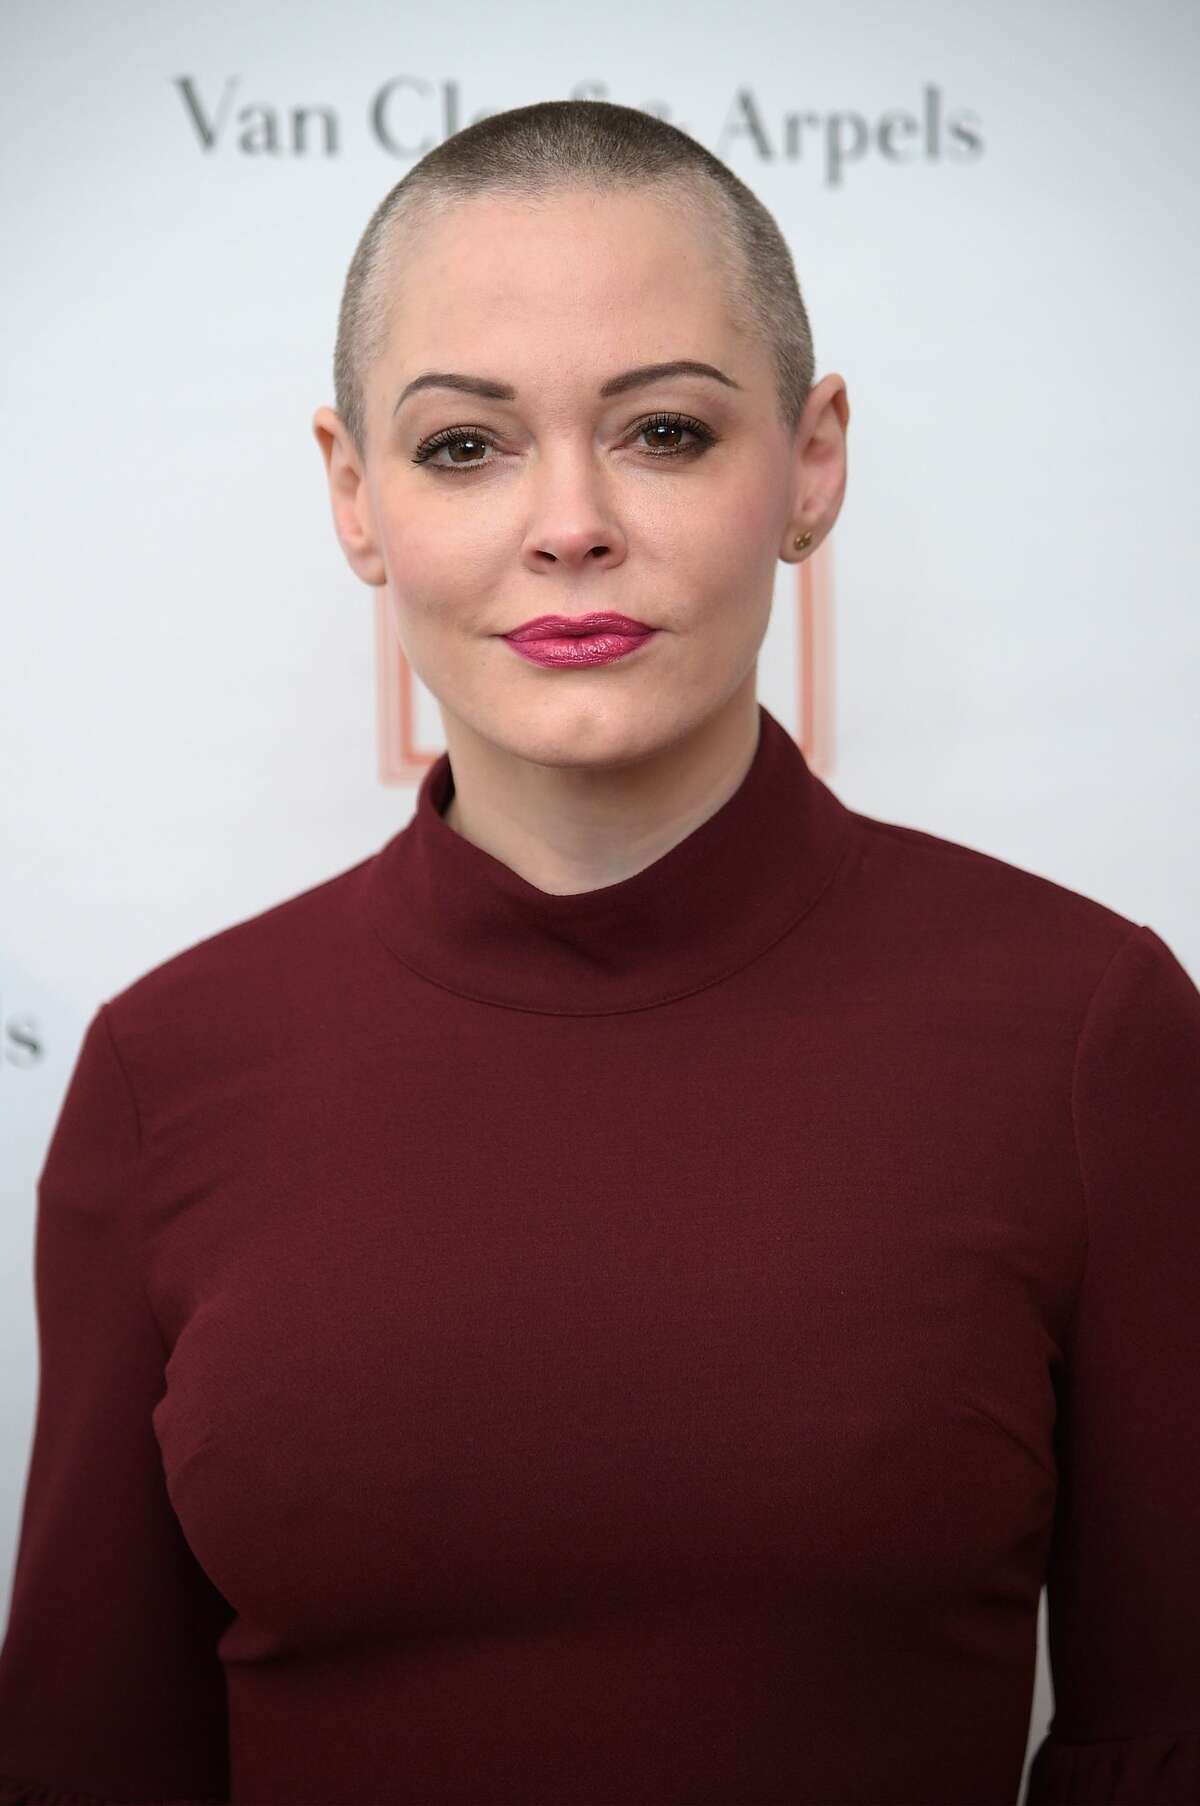 Actress Rose McGowan attends New York Academy Of Art's Tribeca Ball 2016 on April 4, 2016 in New York City.